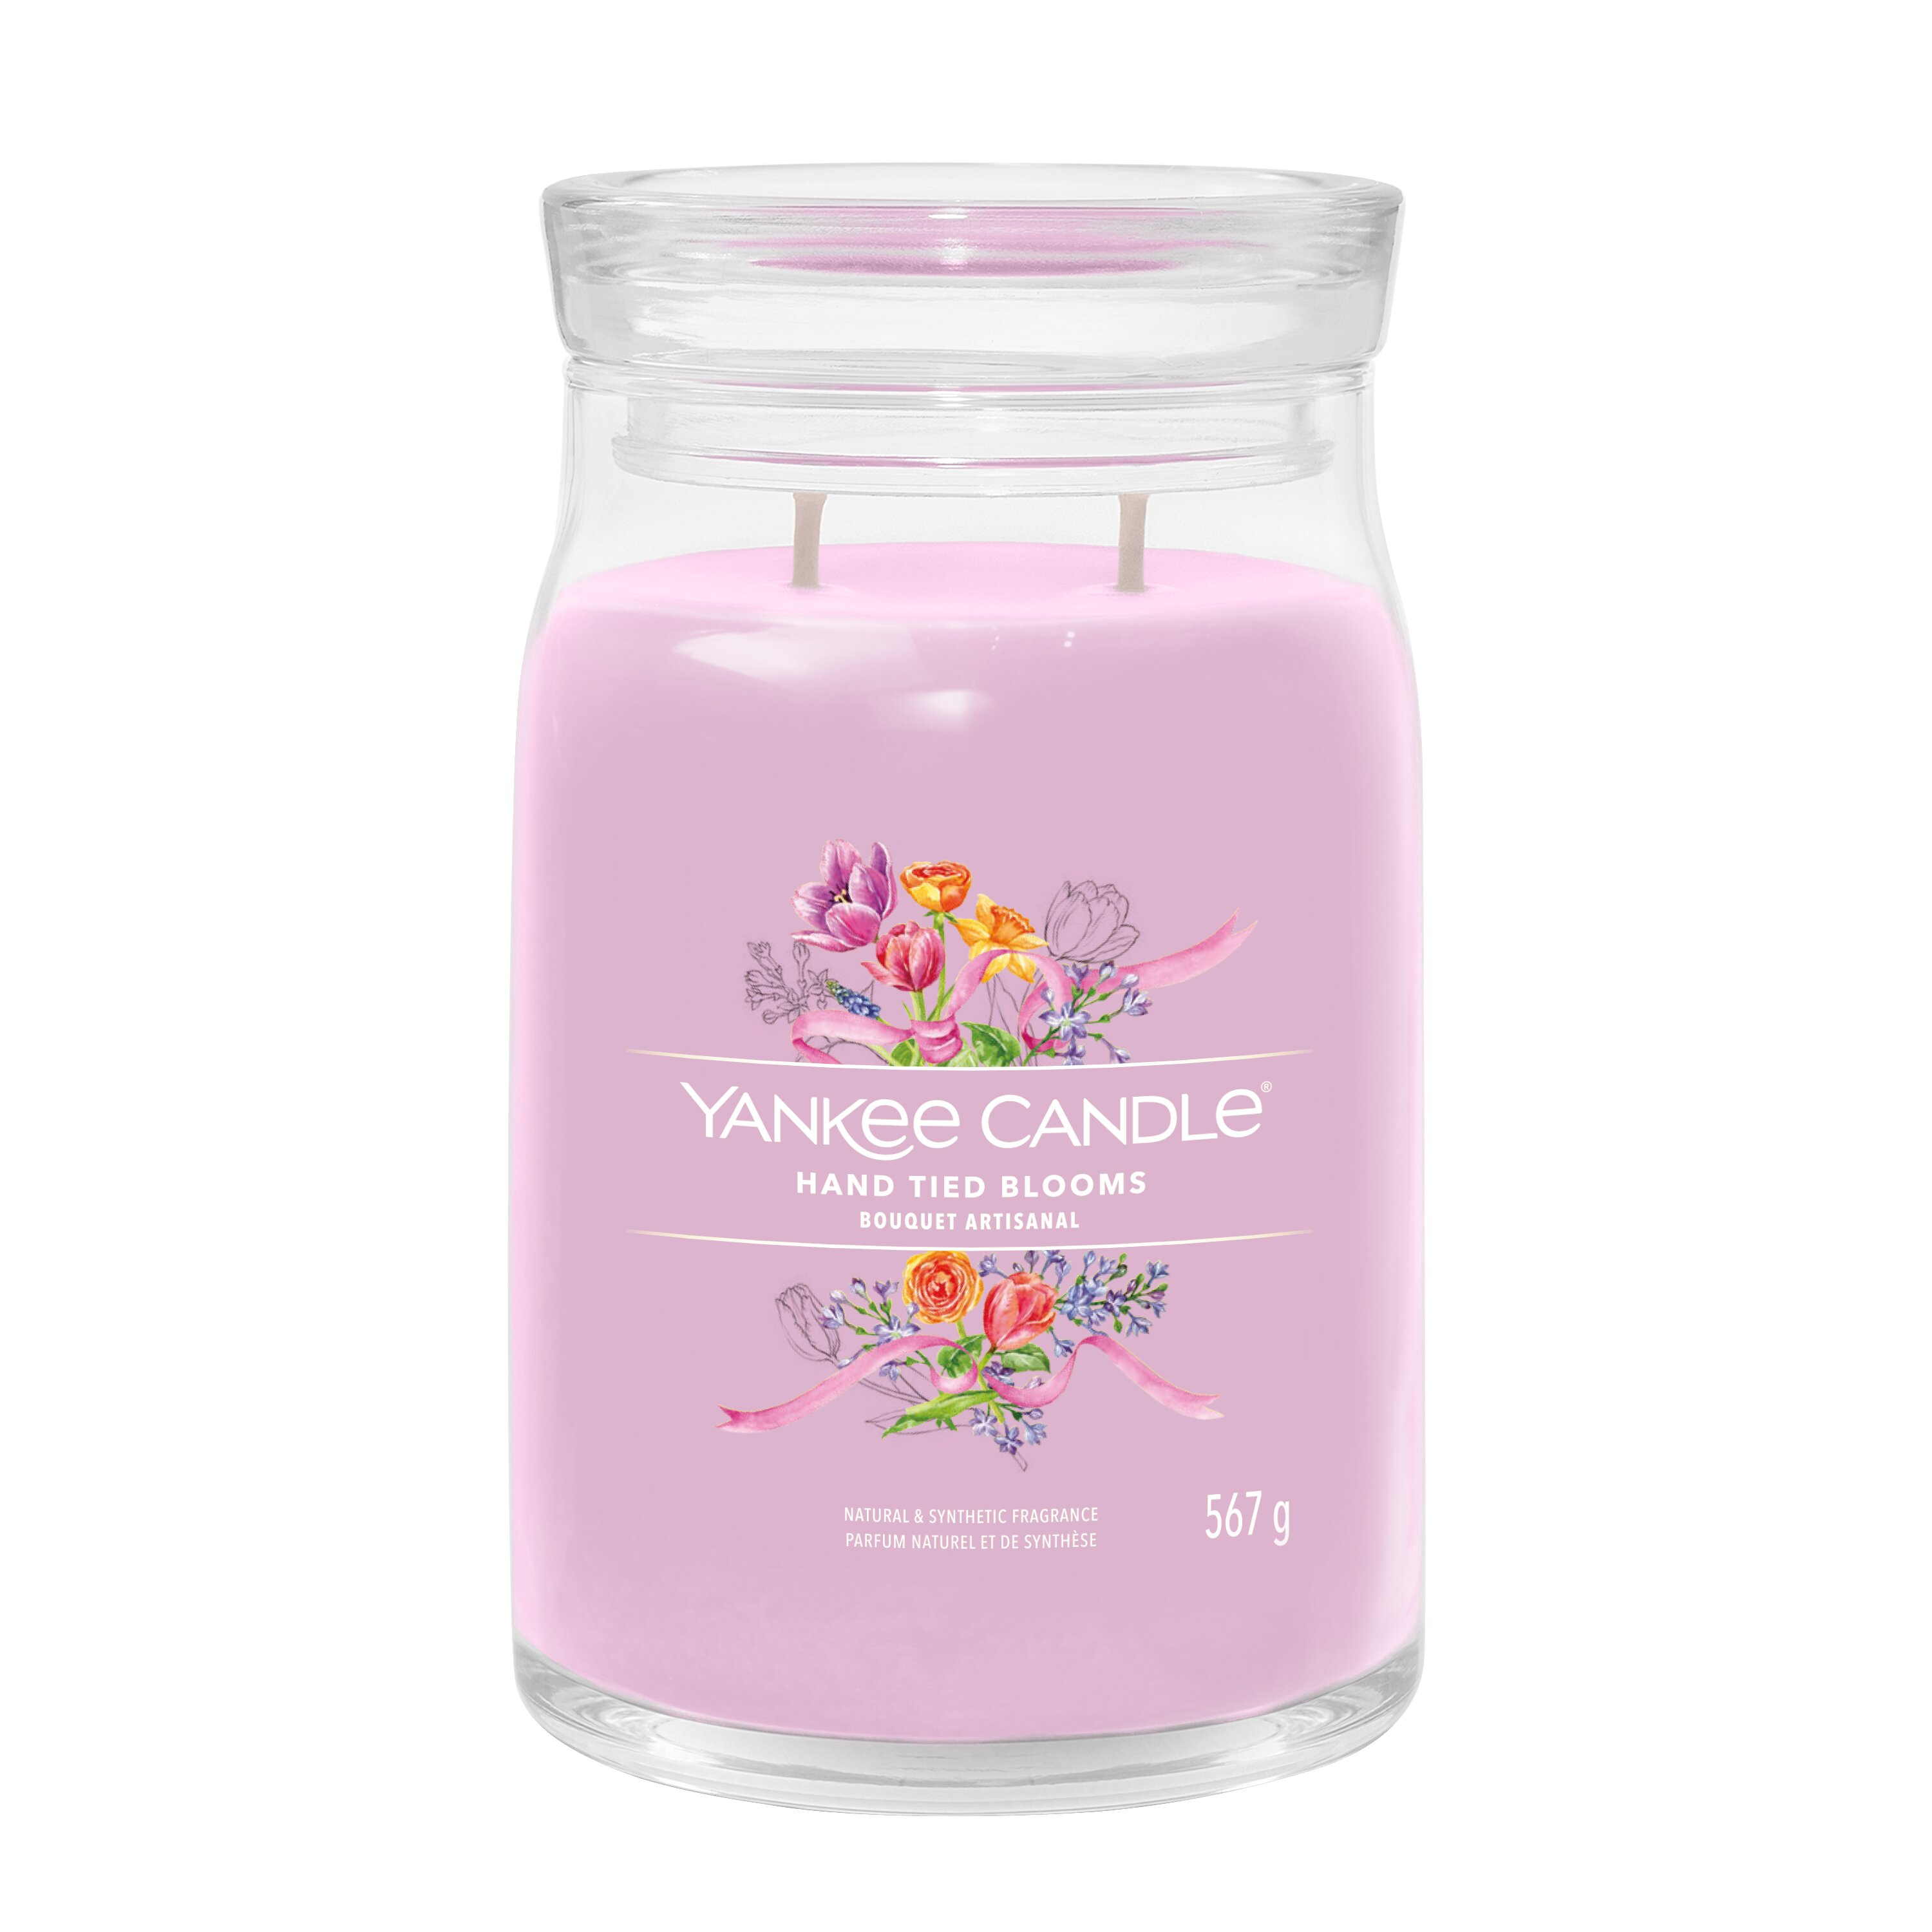 Hand Tied Blooms Signature Large Jar 567g 2-Docht